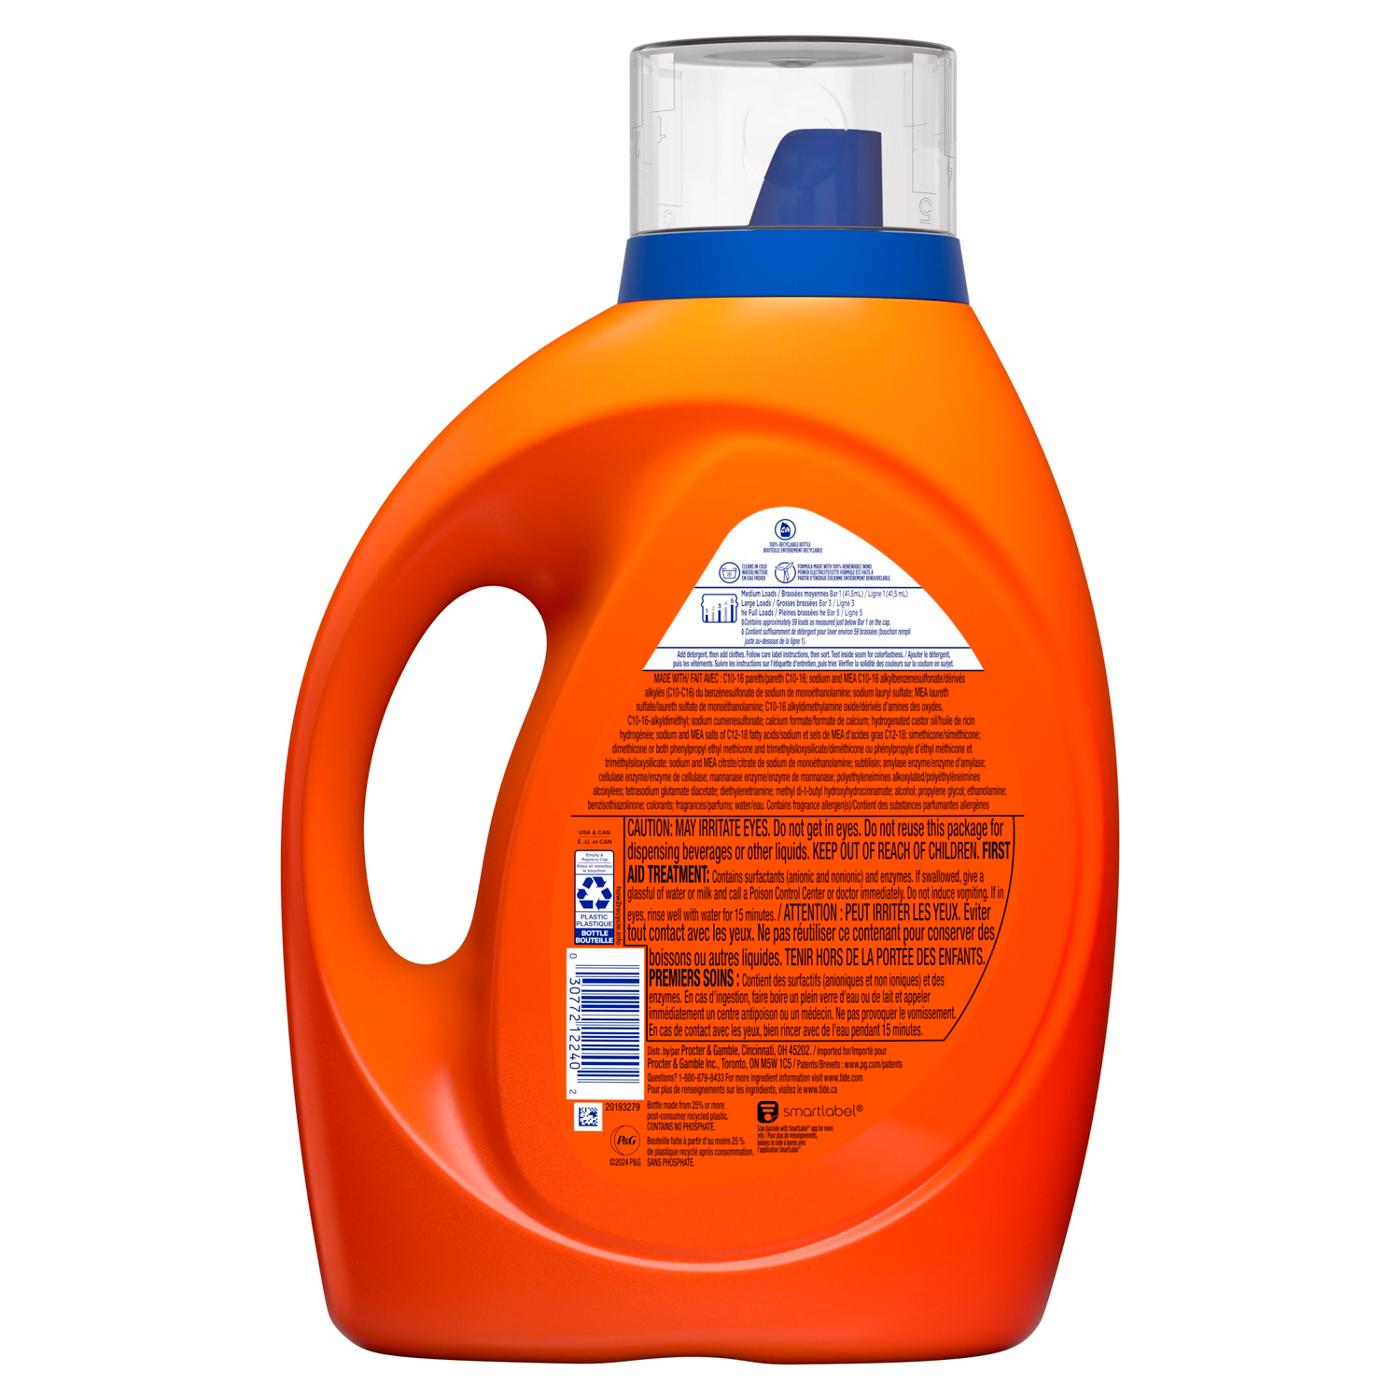 Tide + Ultra OXI HE Turbo Clean Liquid Laundry Detergent, 59 Loads; image 2 of 9